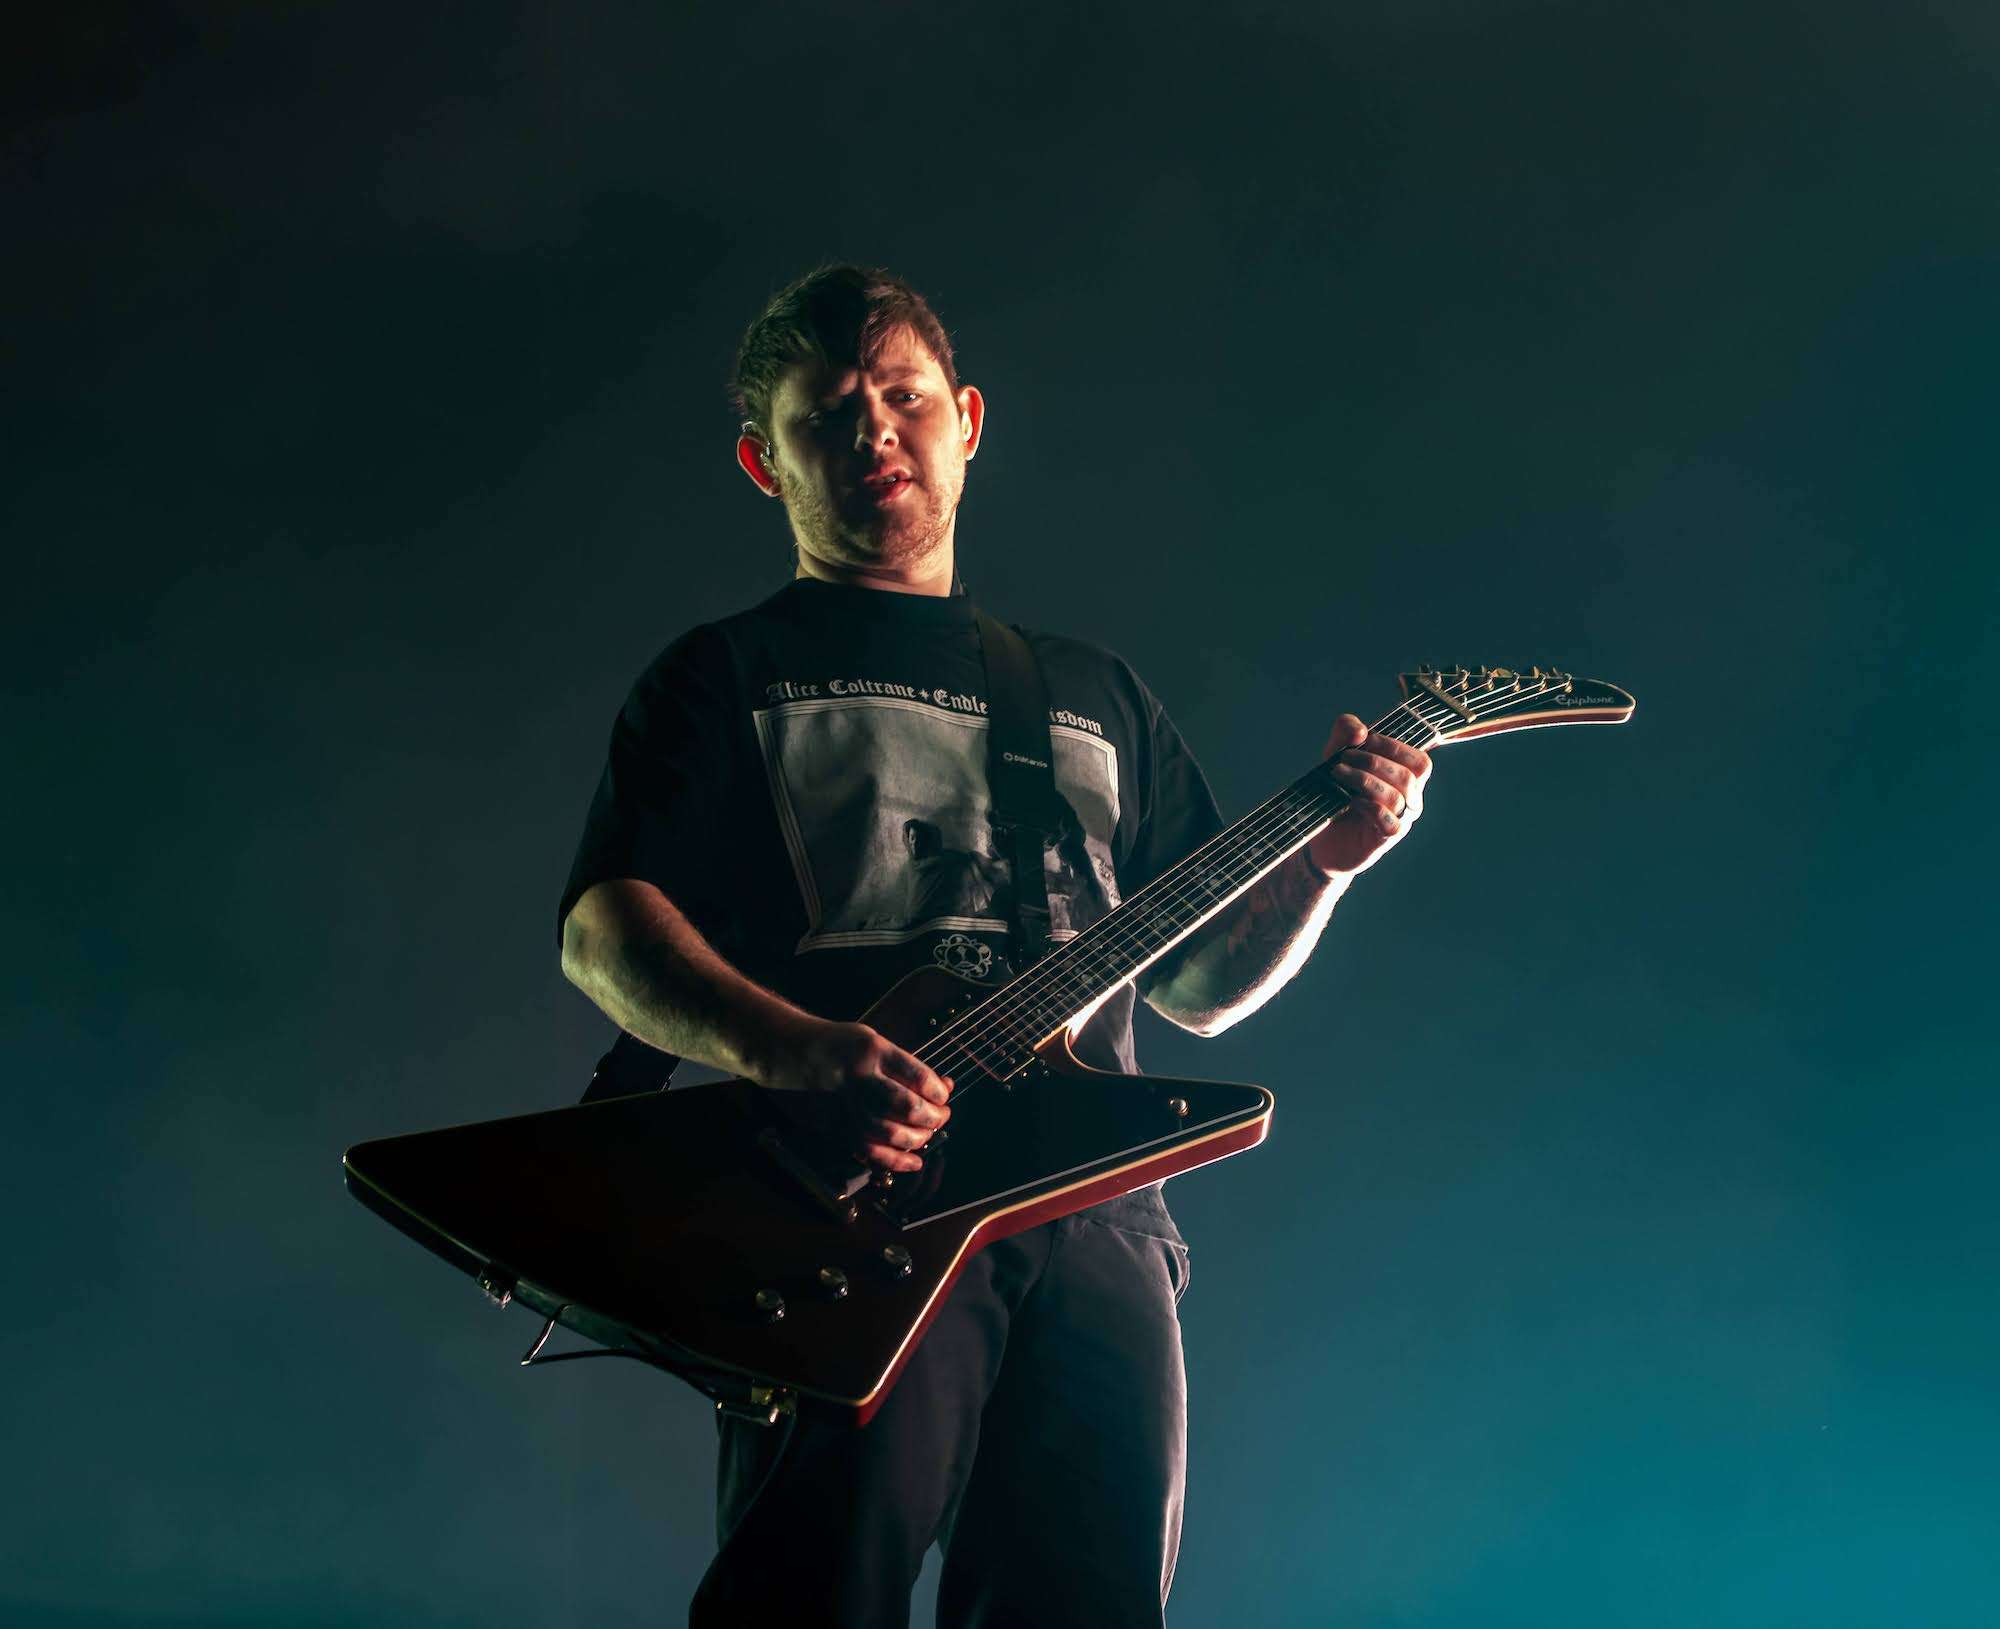 Bring Me the Horizon Live at Wintrust Arena [GALLERY] 9